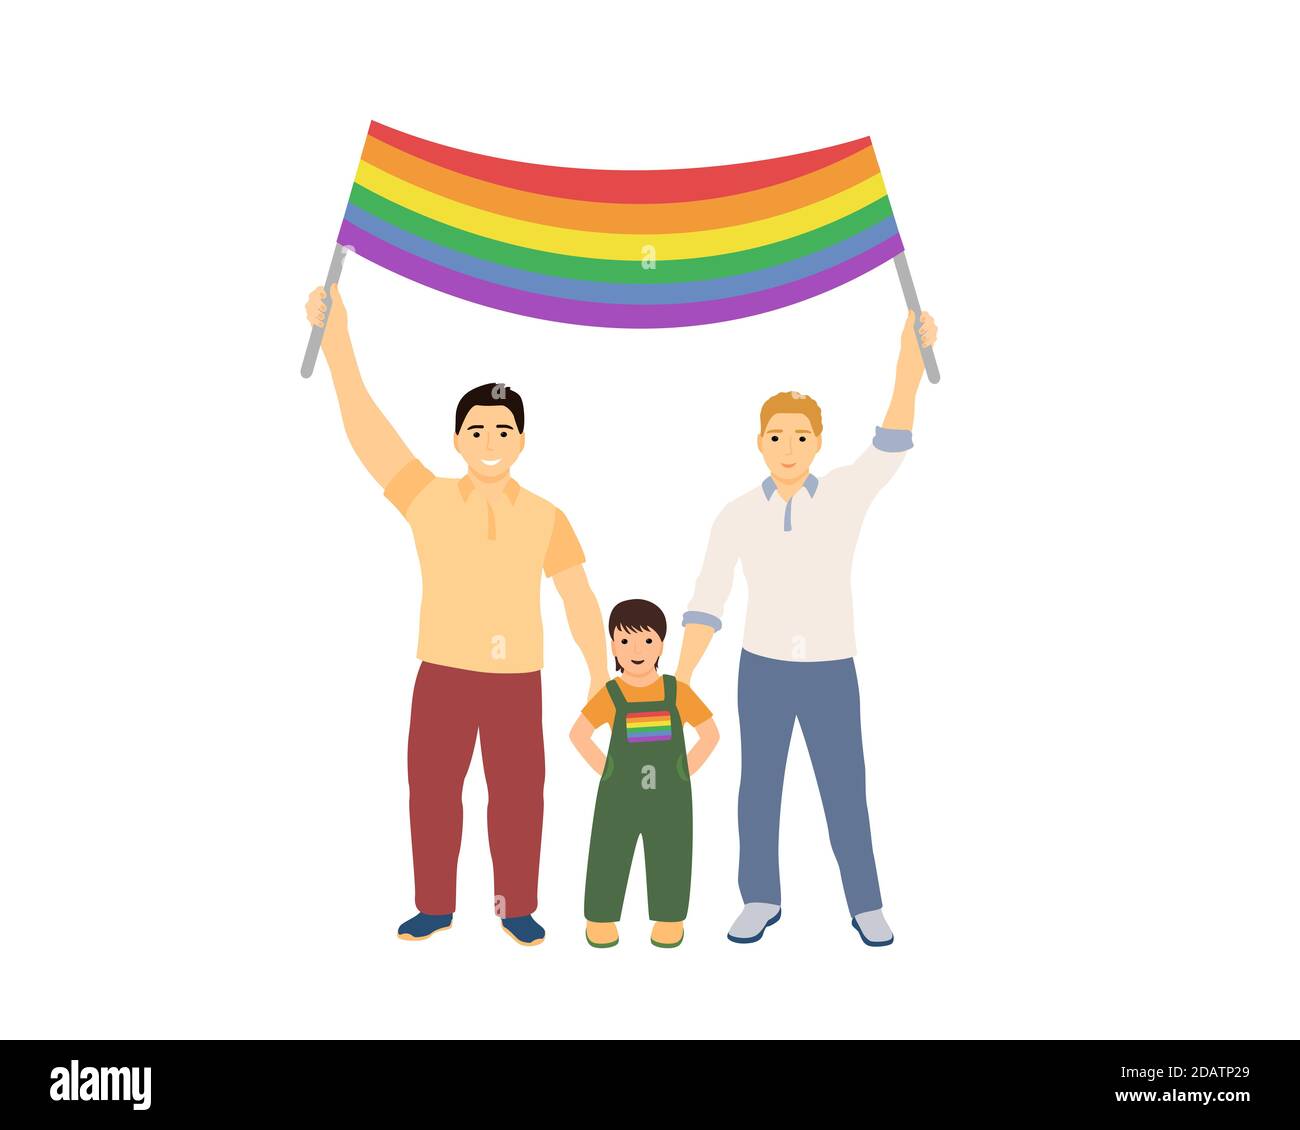 LGBT family men and baby holding a rainbow flag over their heads. Happy Pride month. vector illustration Stock Vector